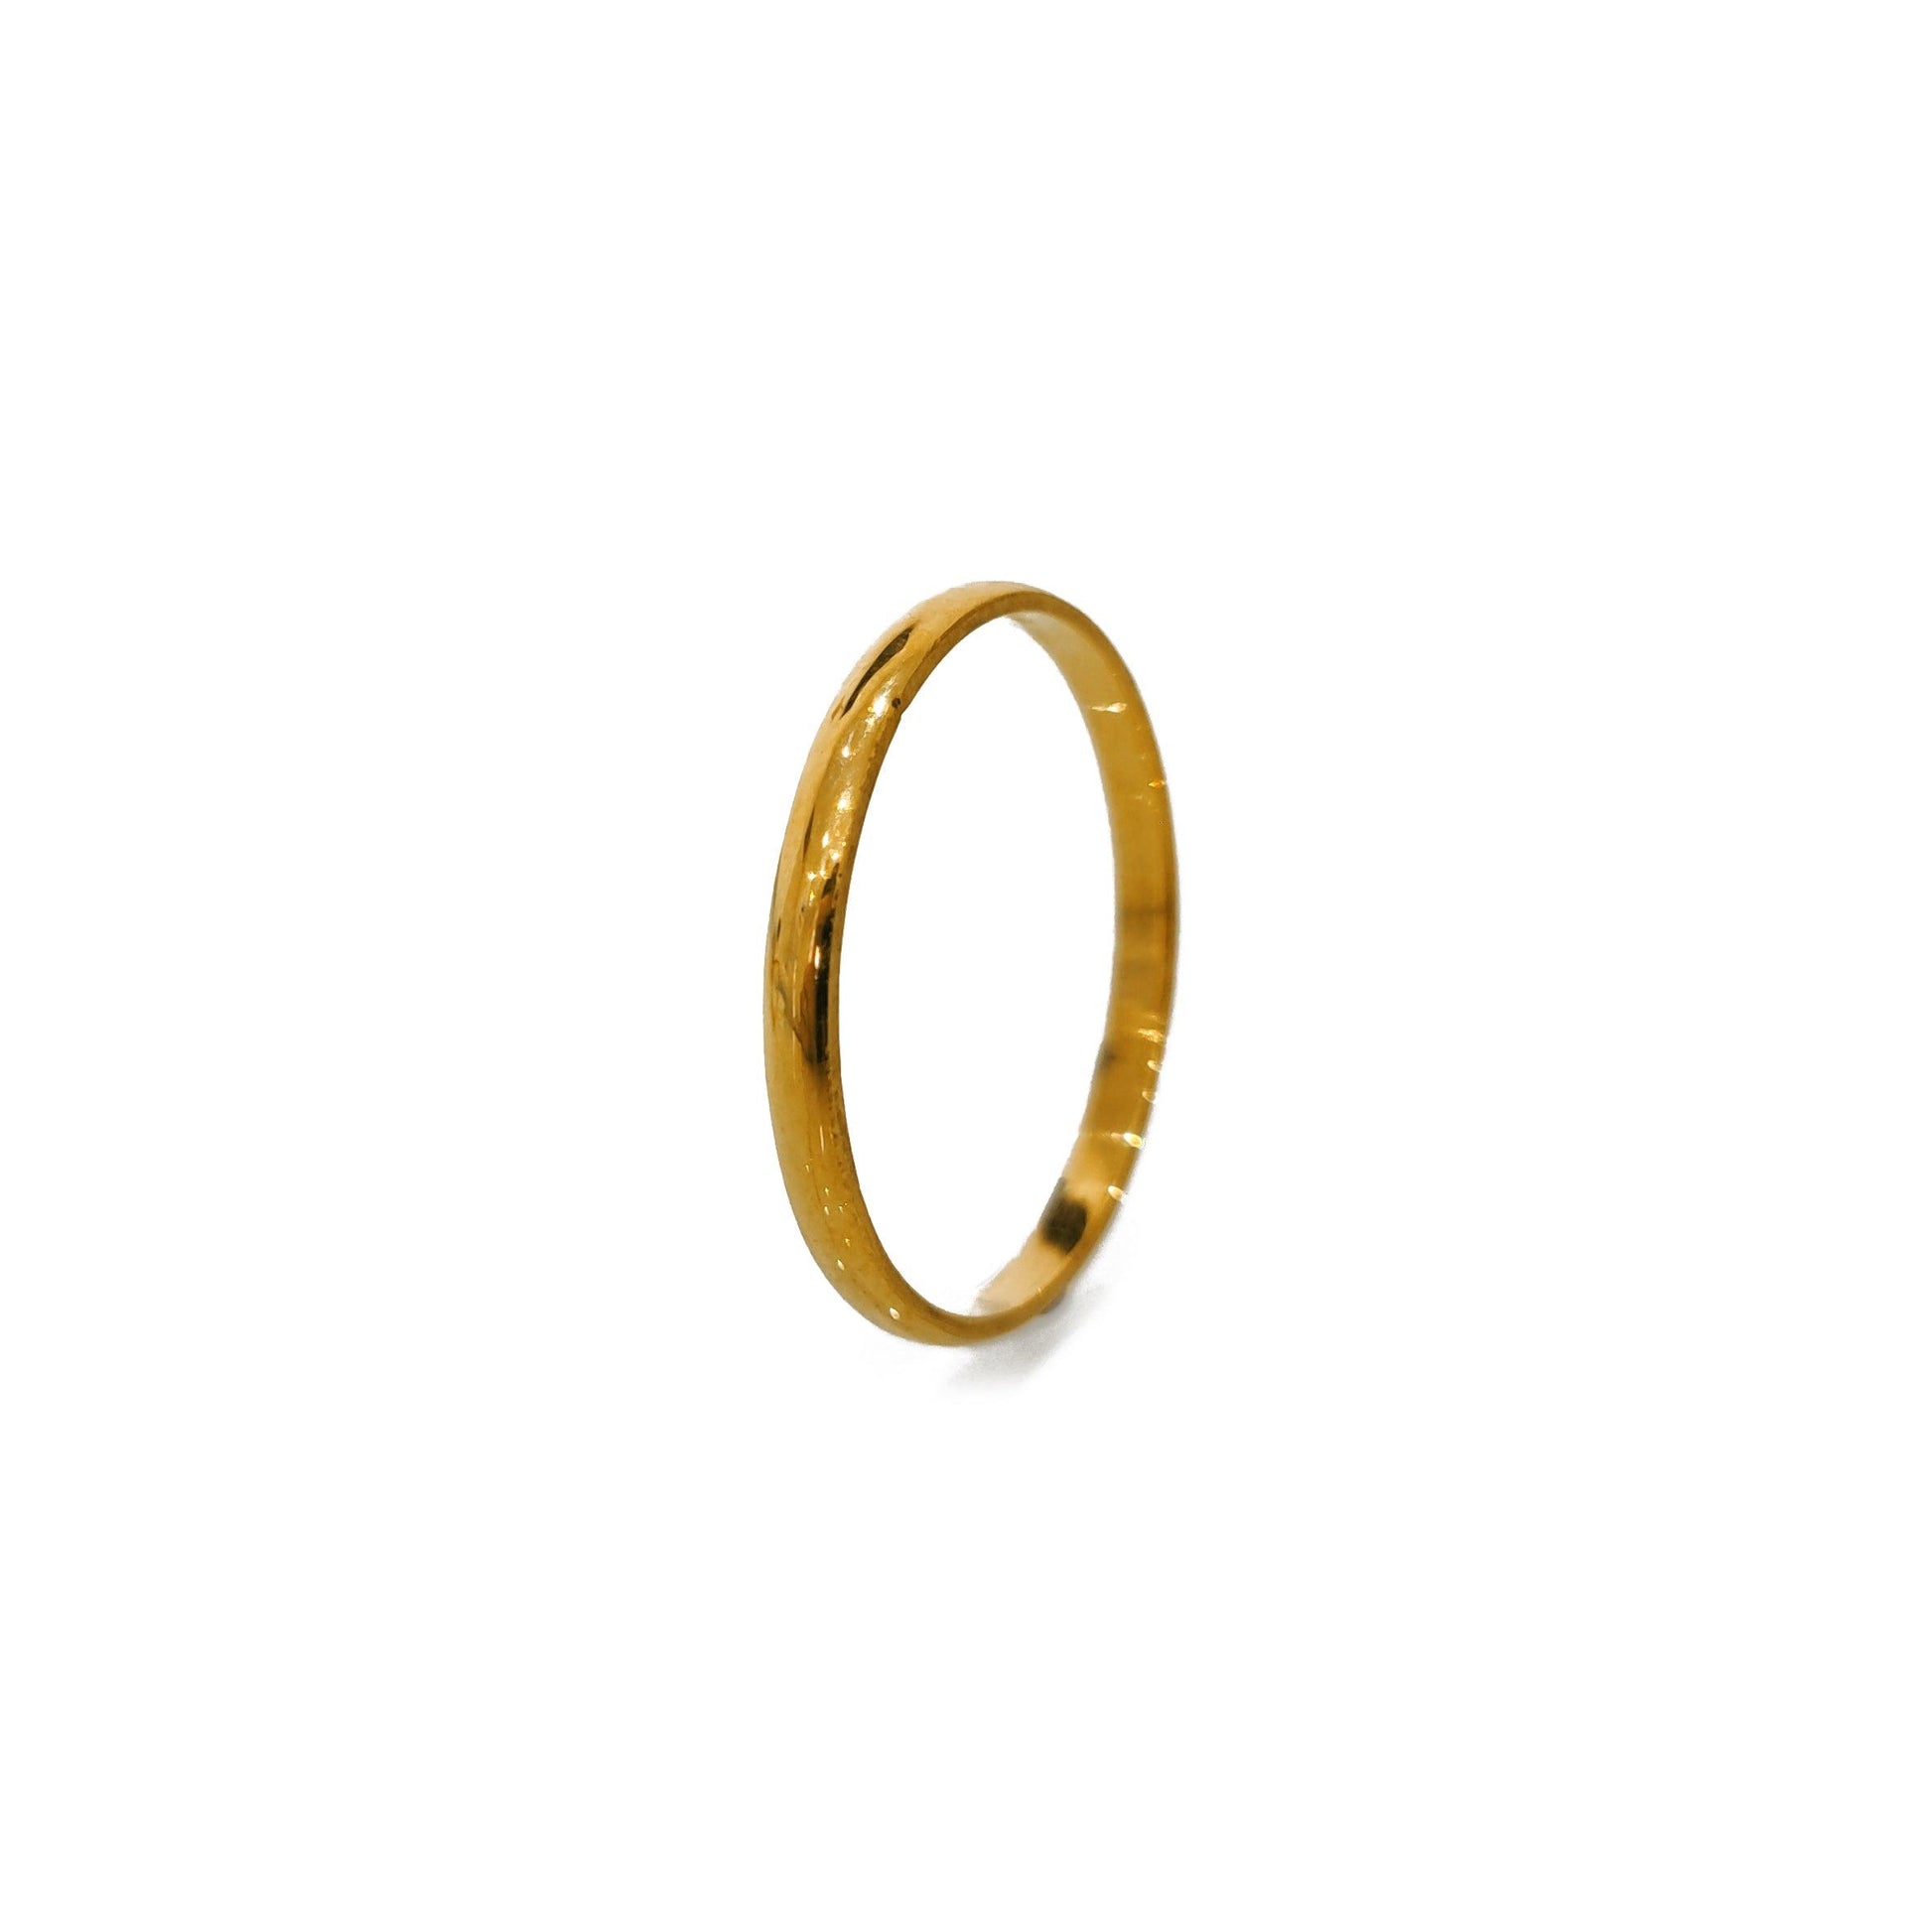 22ct Gold D-Shaped Wedding Bands 2-5mm WB-8174 - Minar Jewellers